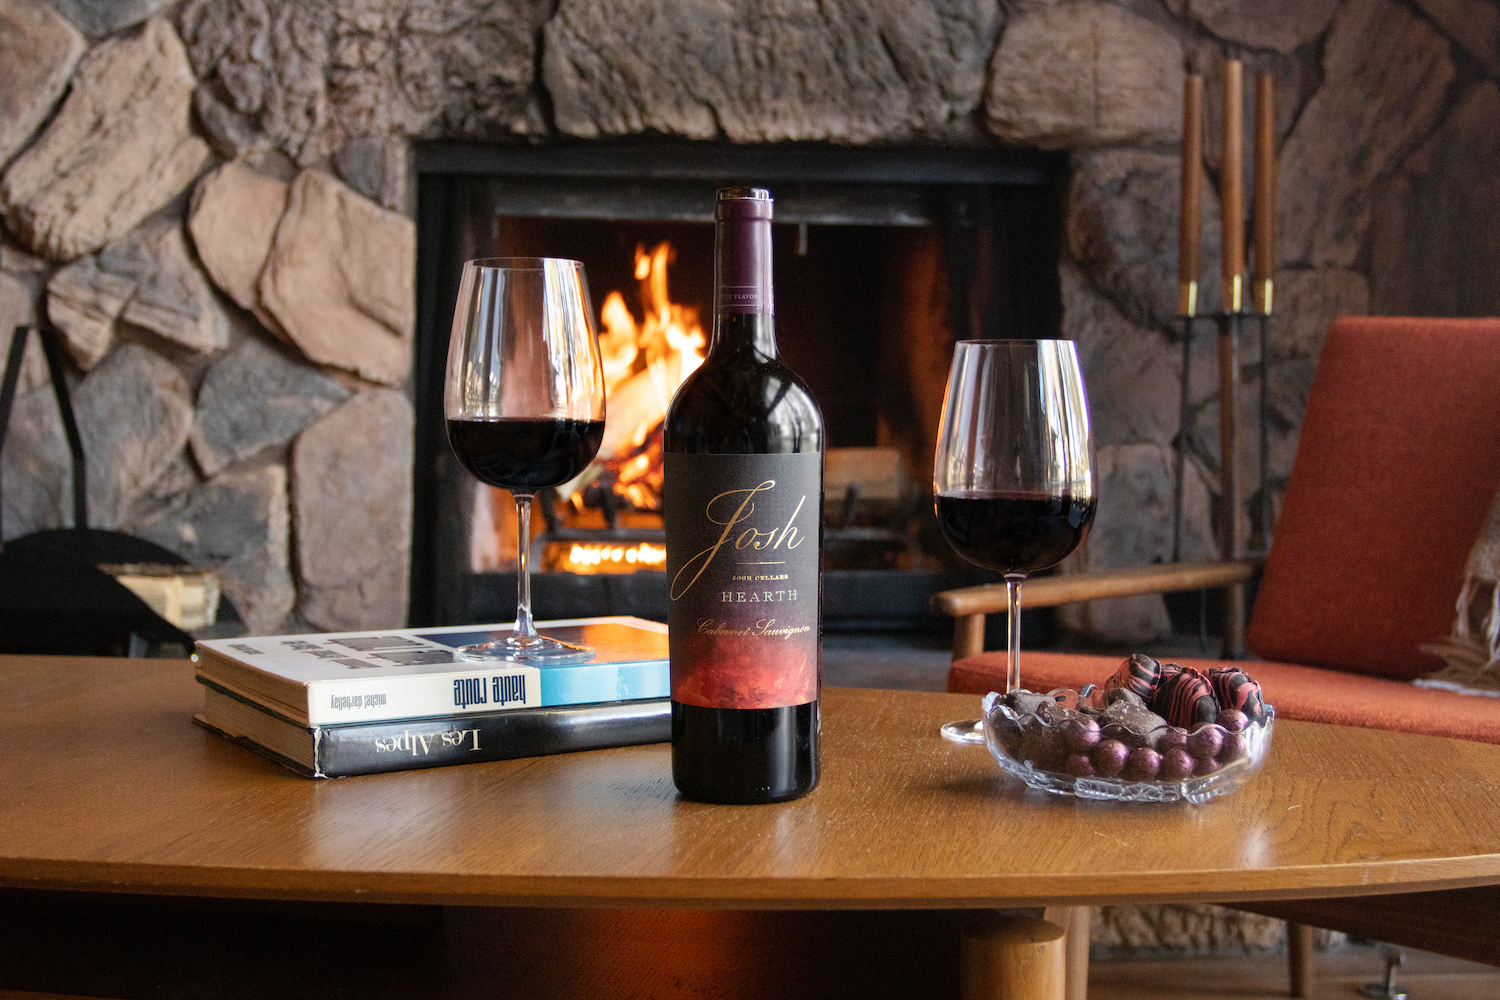 josh cellars Hearth Cabernet Sauvignon in front of a fireplaces